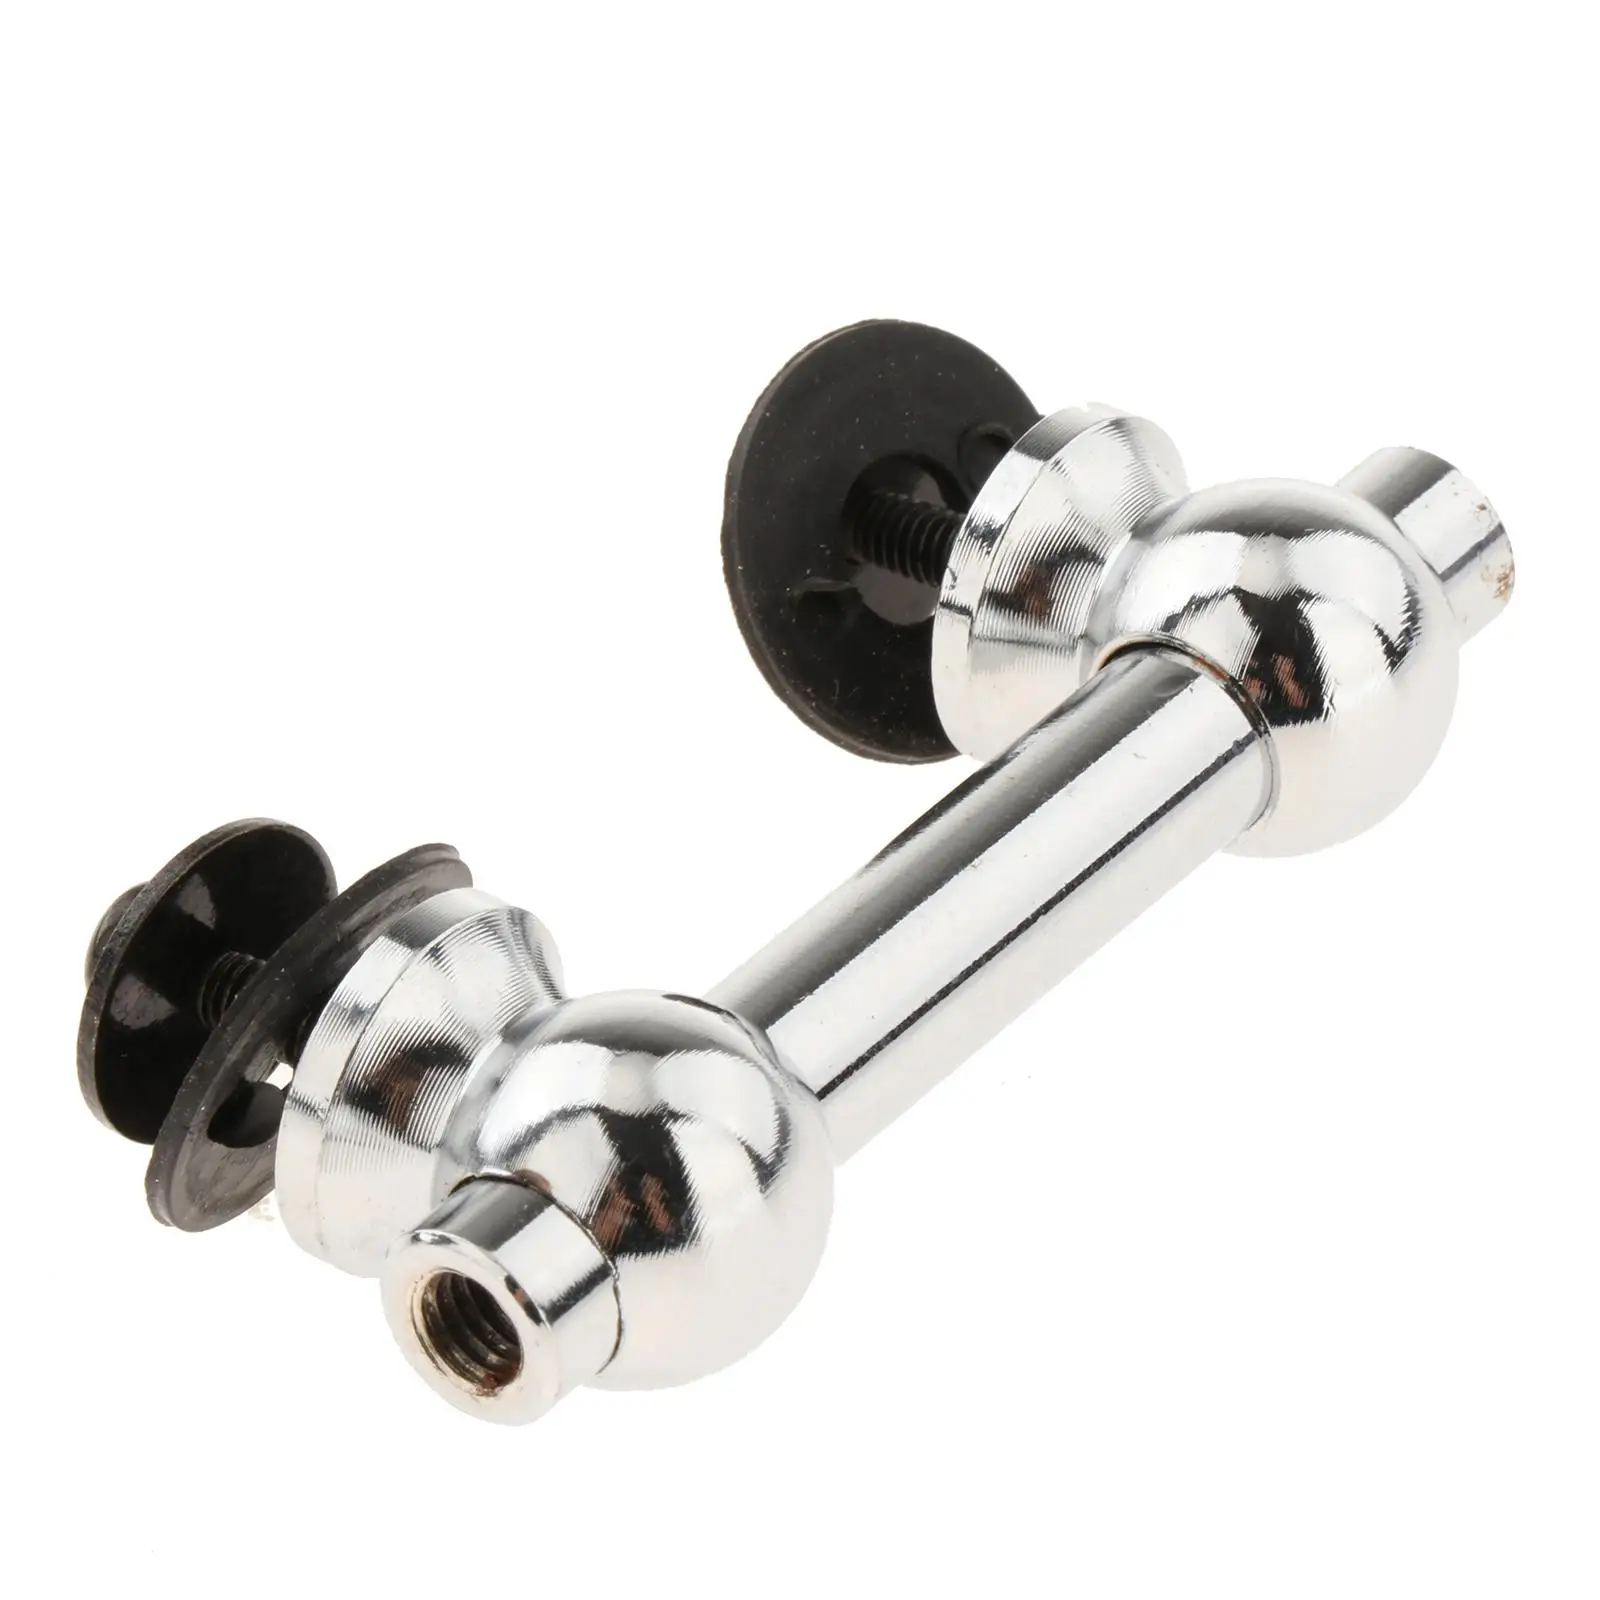 Multifunction Double End Drum Lugs Adjustable Two Side Drum Lug Easy to Install Snare Drum Stand Percussion Instruments Parts